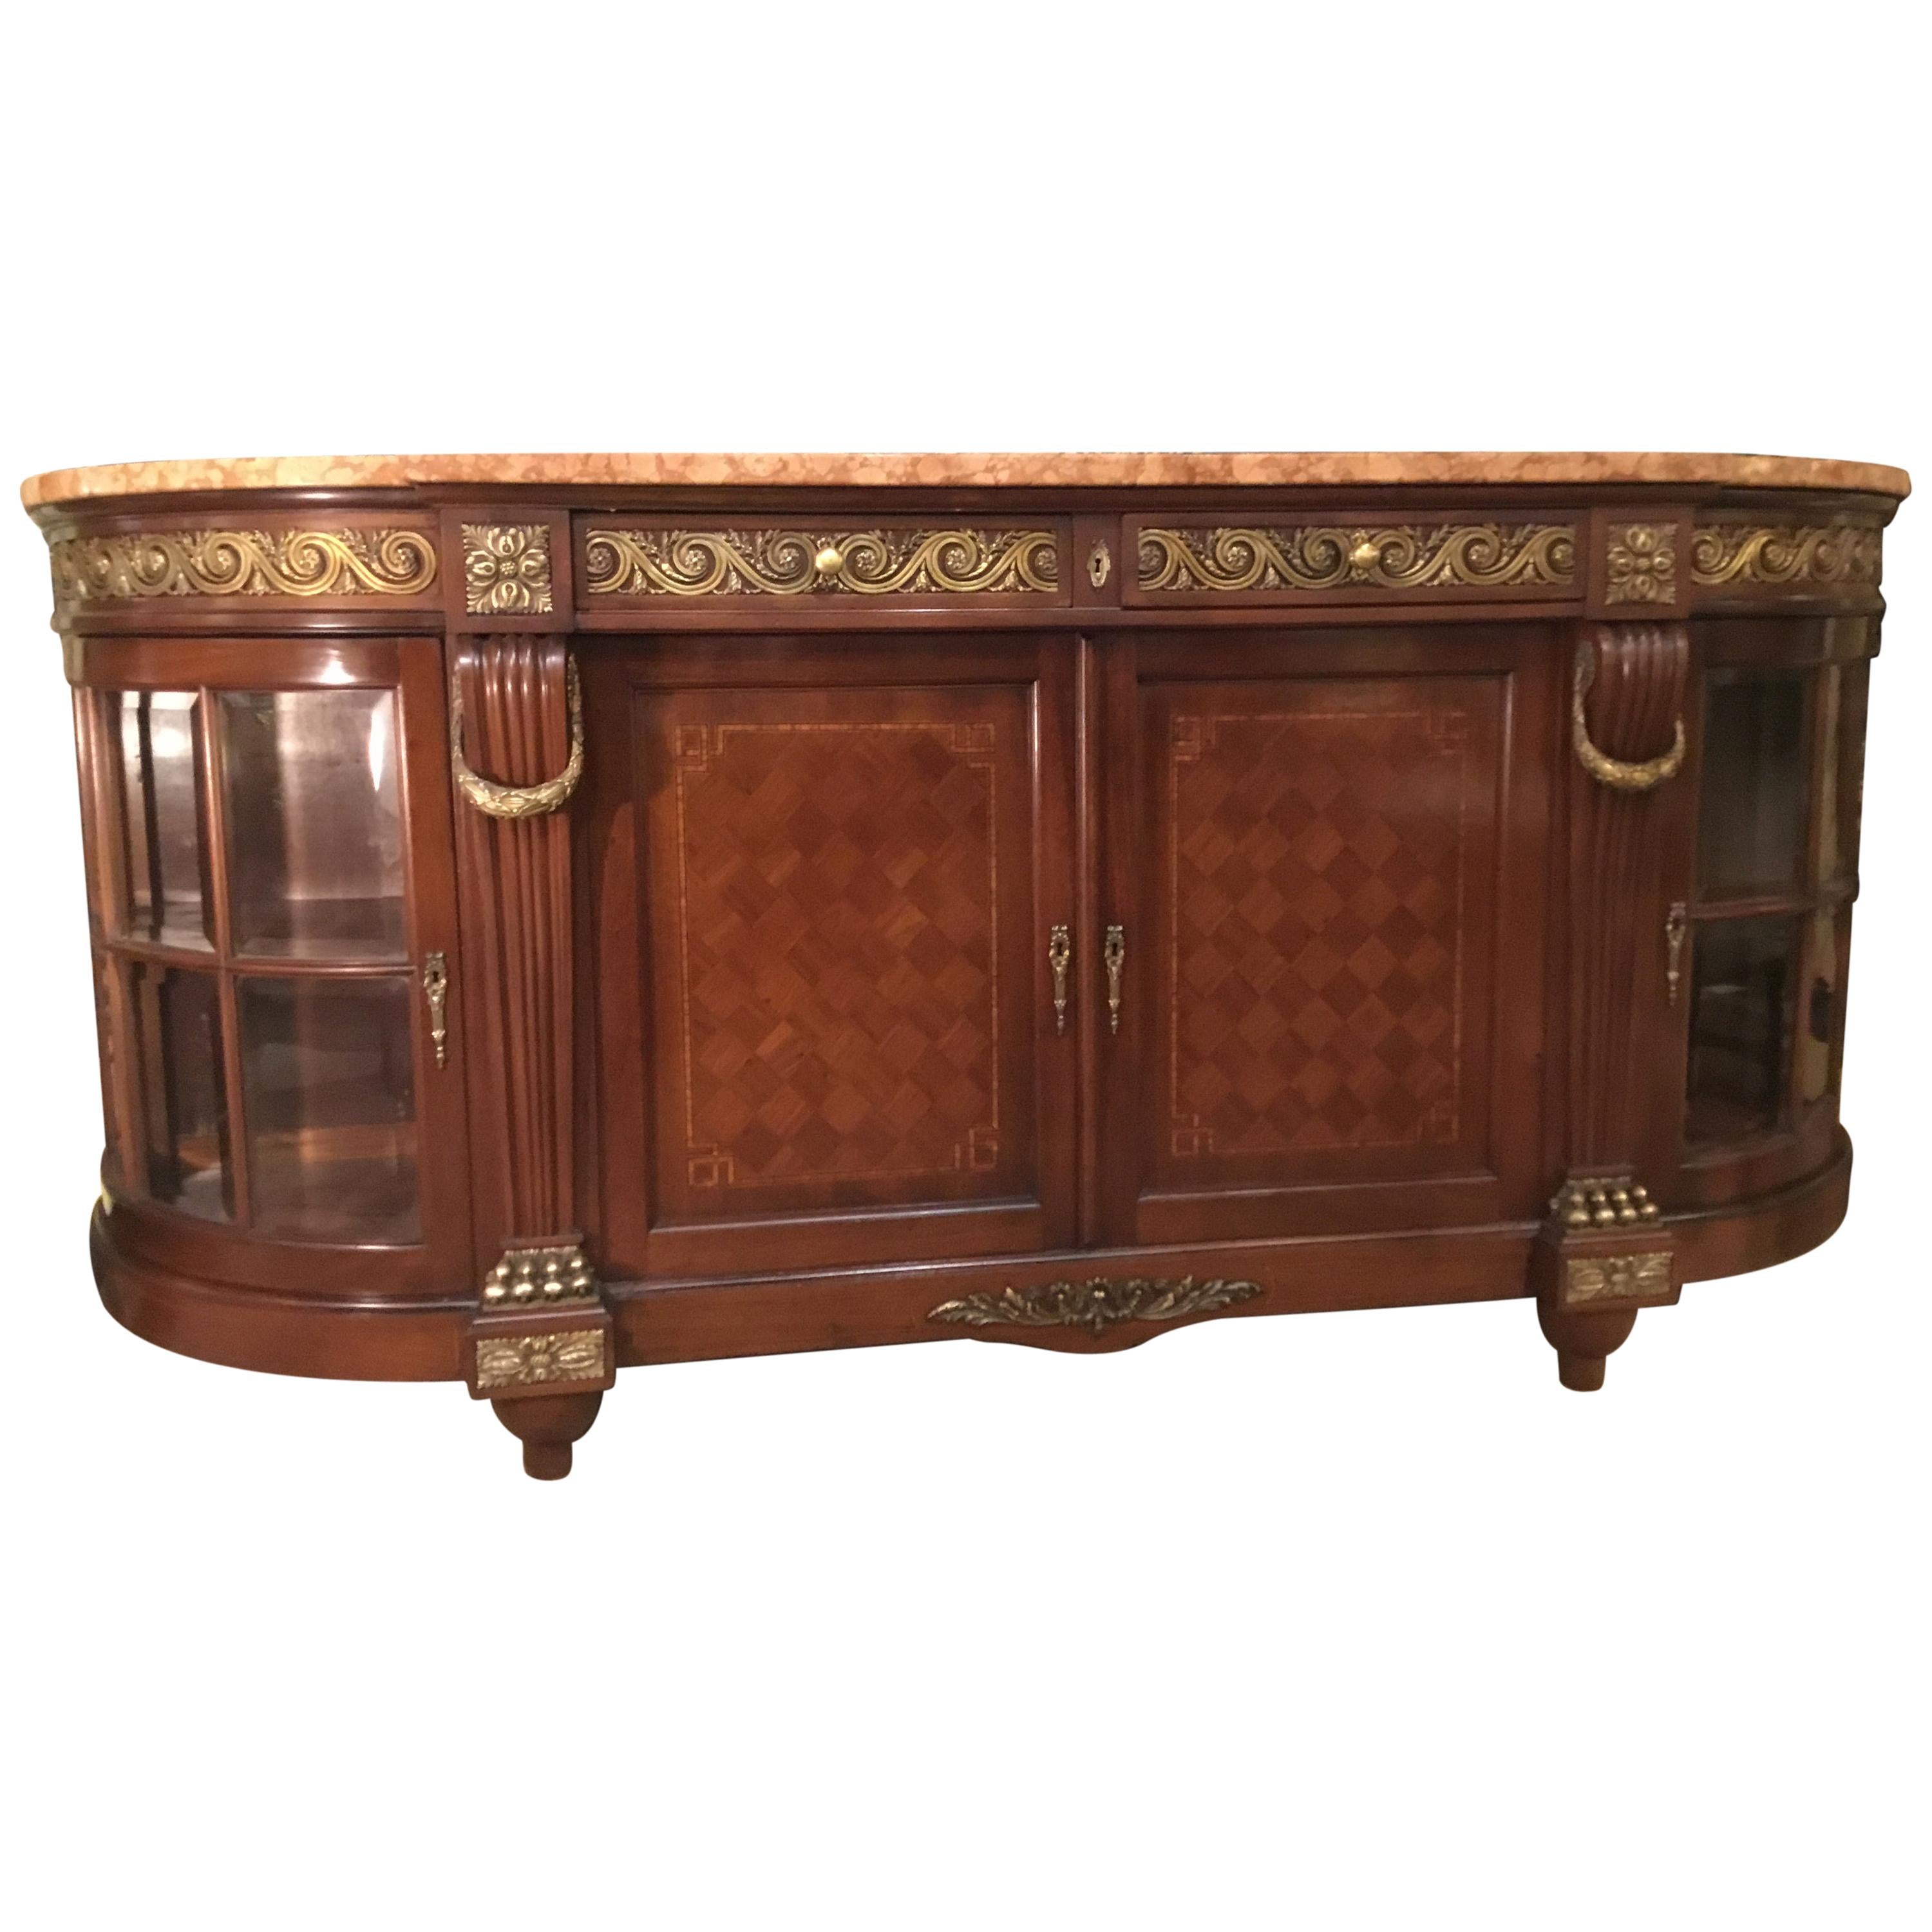 French Buffet/Sideboard, 19th Century with Marquetry and Bronze Dore Mounts